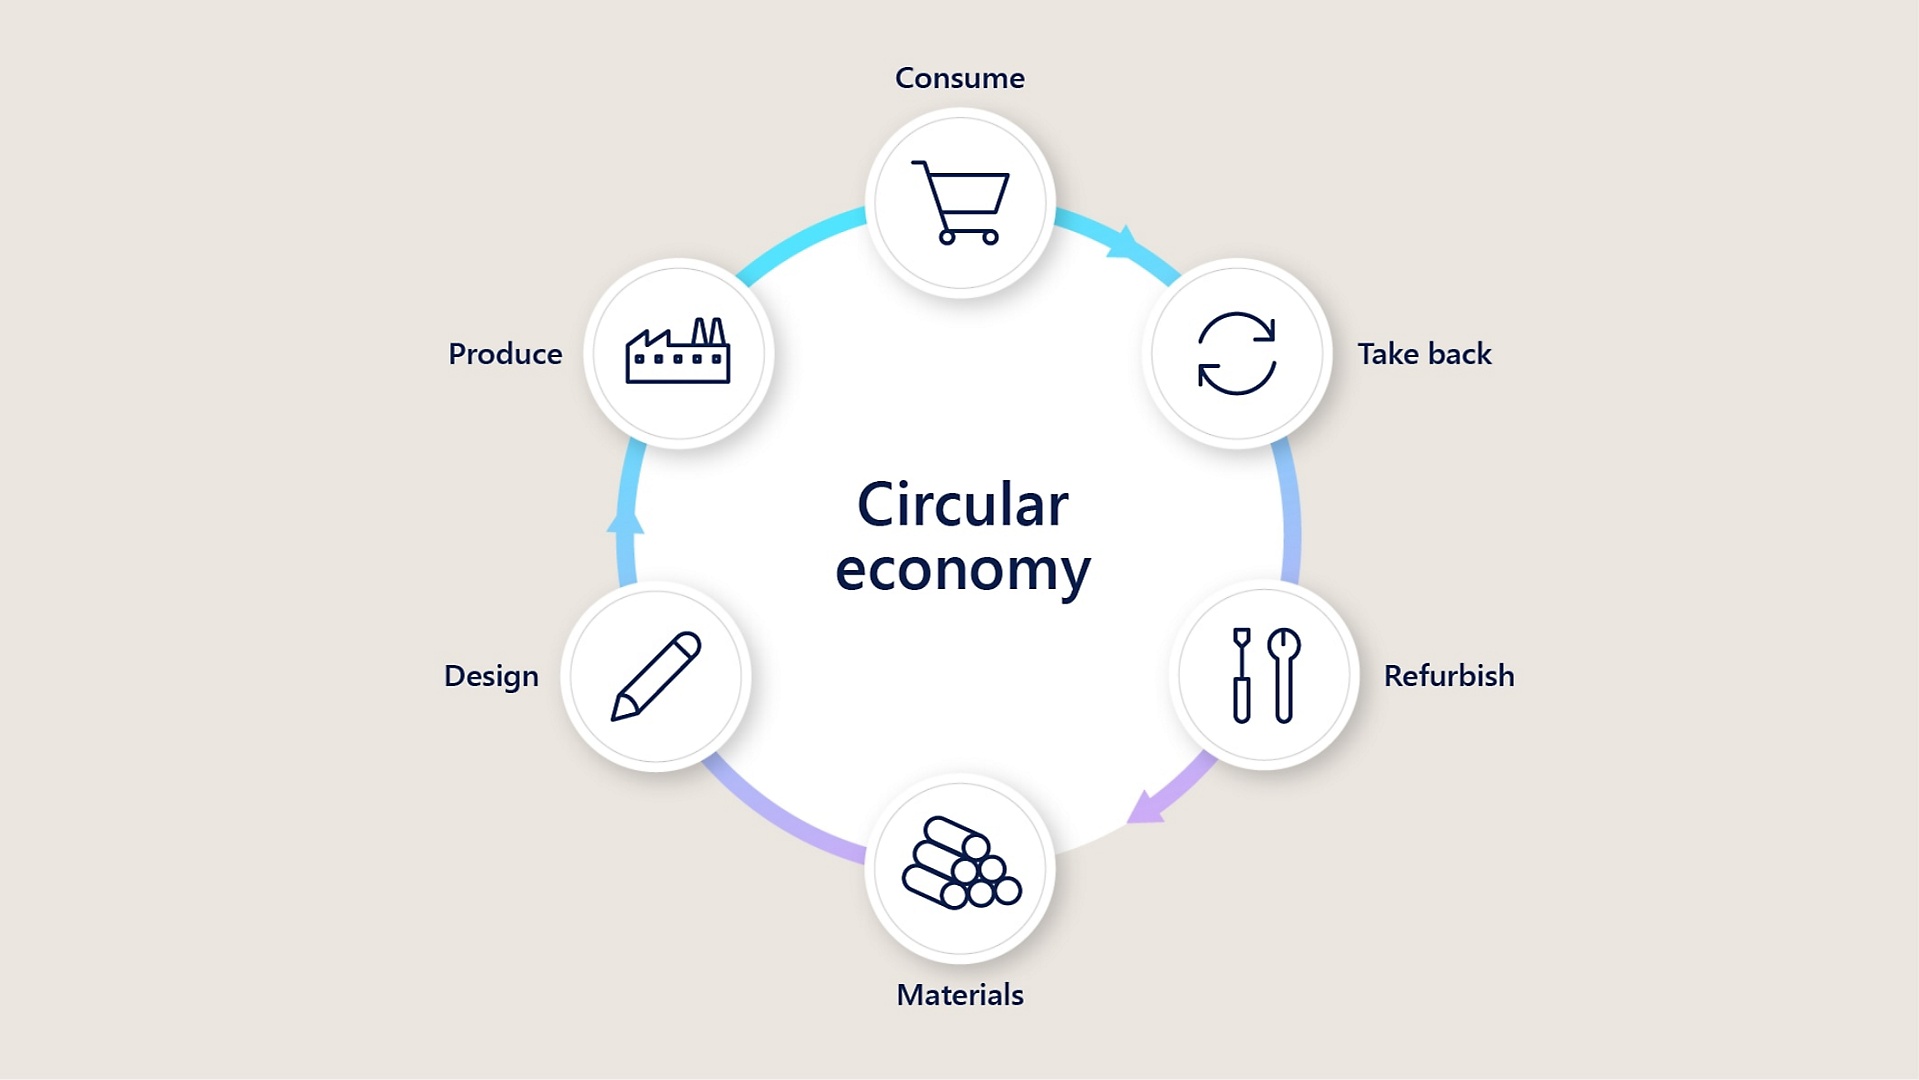 The circular economy which consists of consumer, take back, refurbish, materials, design, and produce.